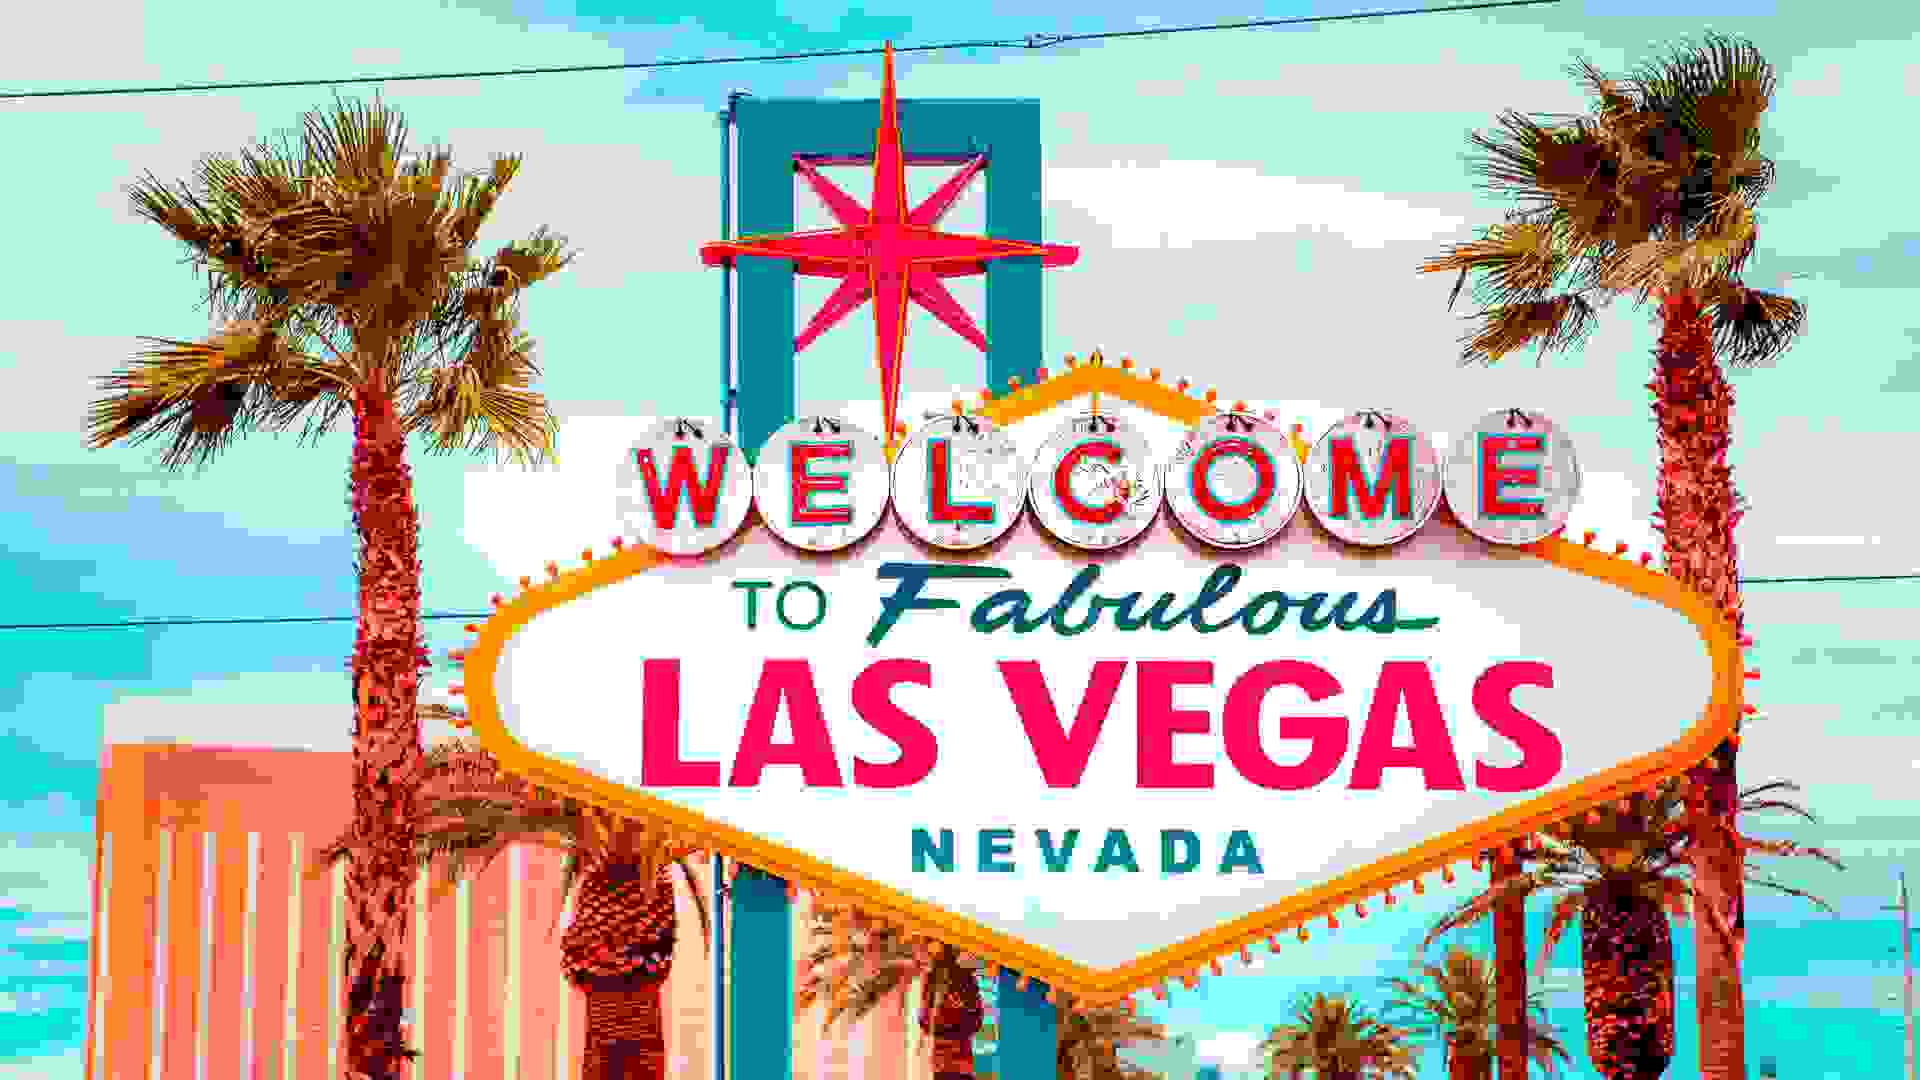 Welcome to Las Vegas sign in Nevada